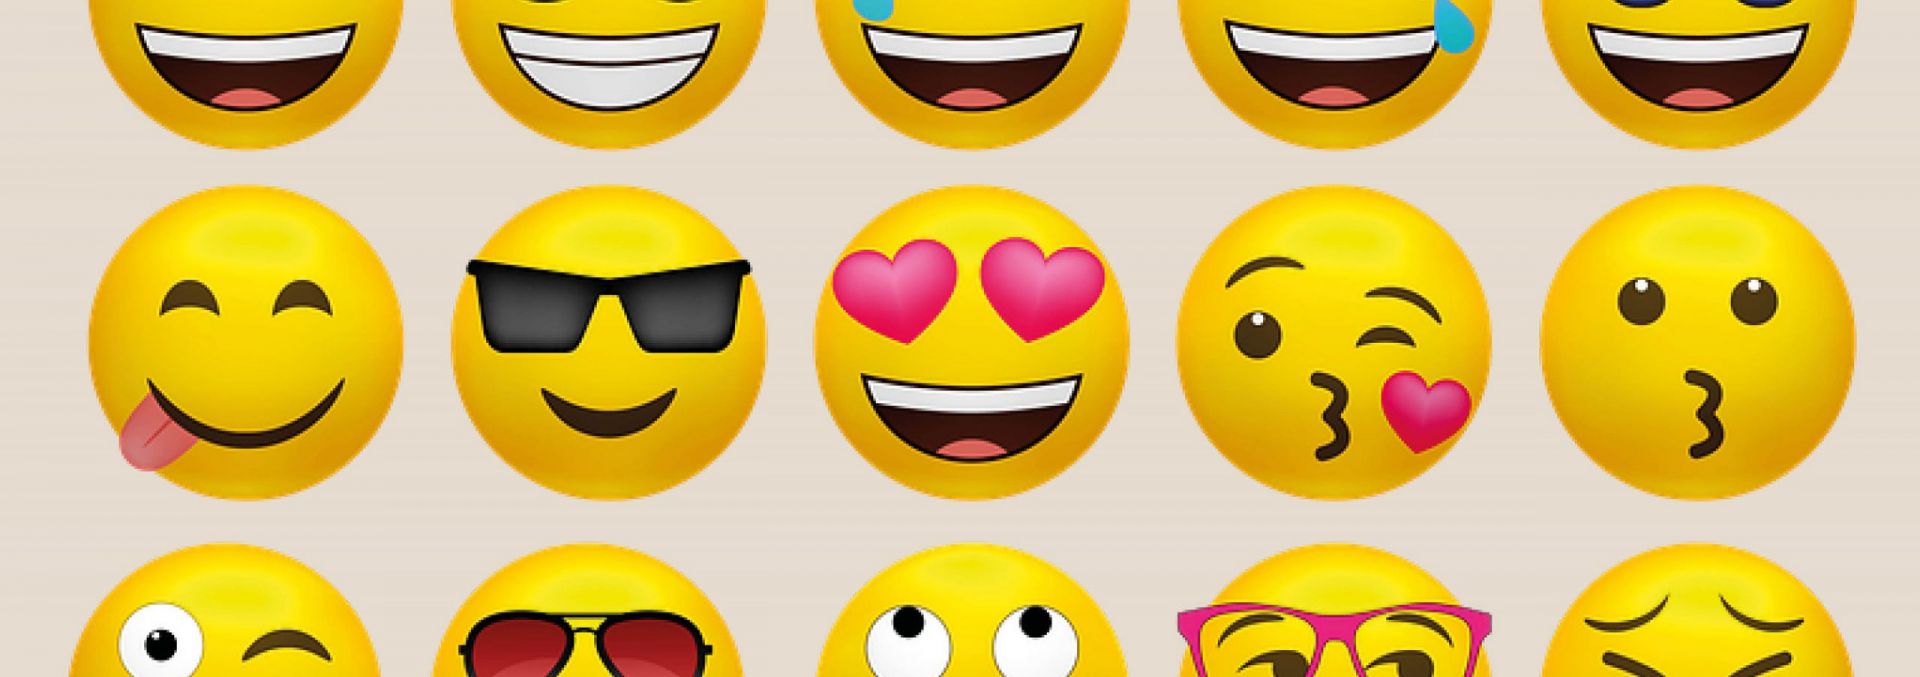 Yellow emojis that makes different facial expressions.